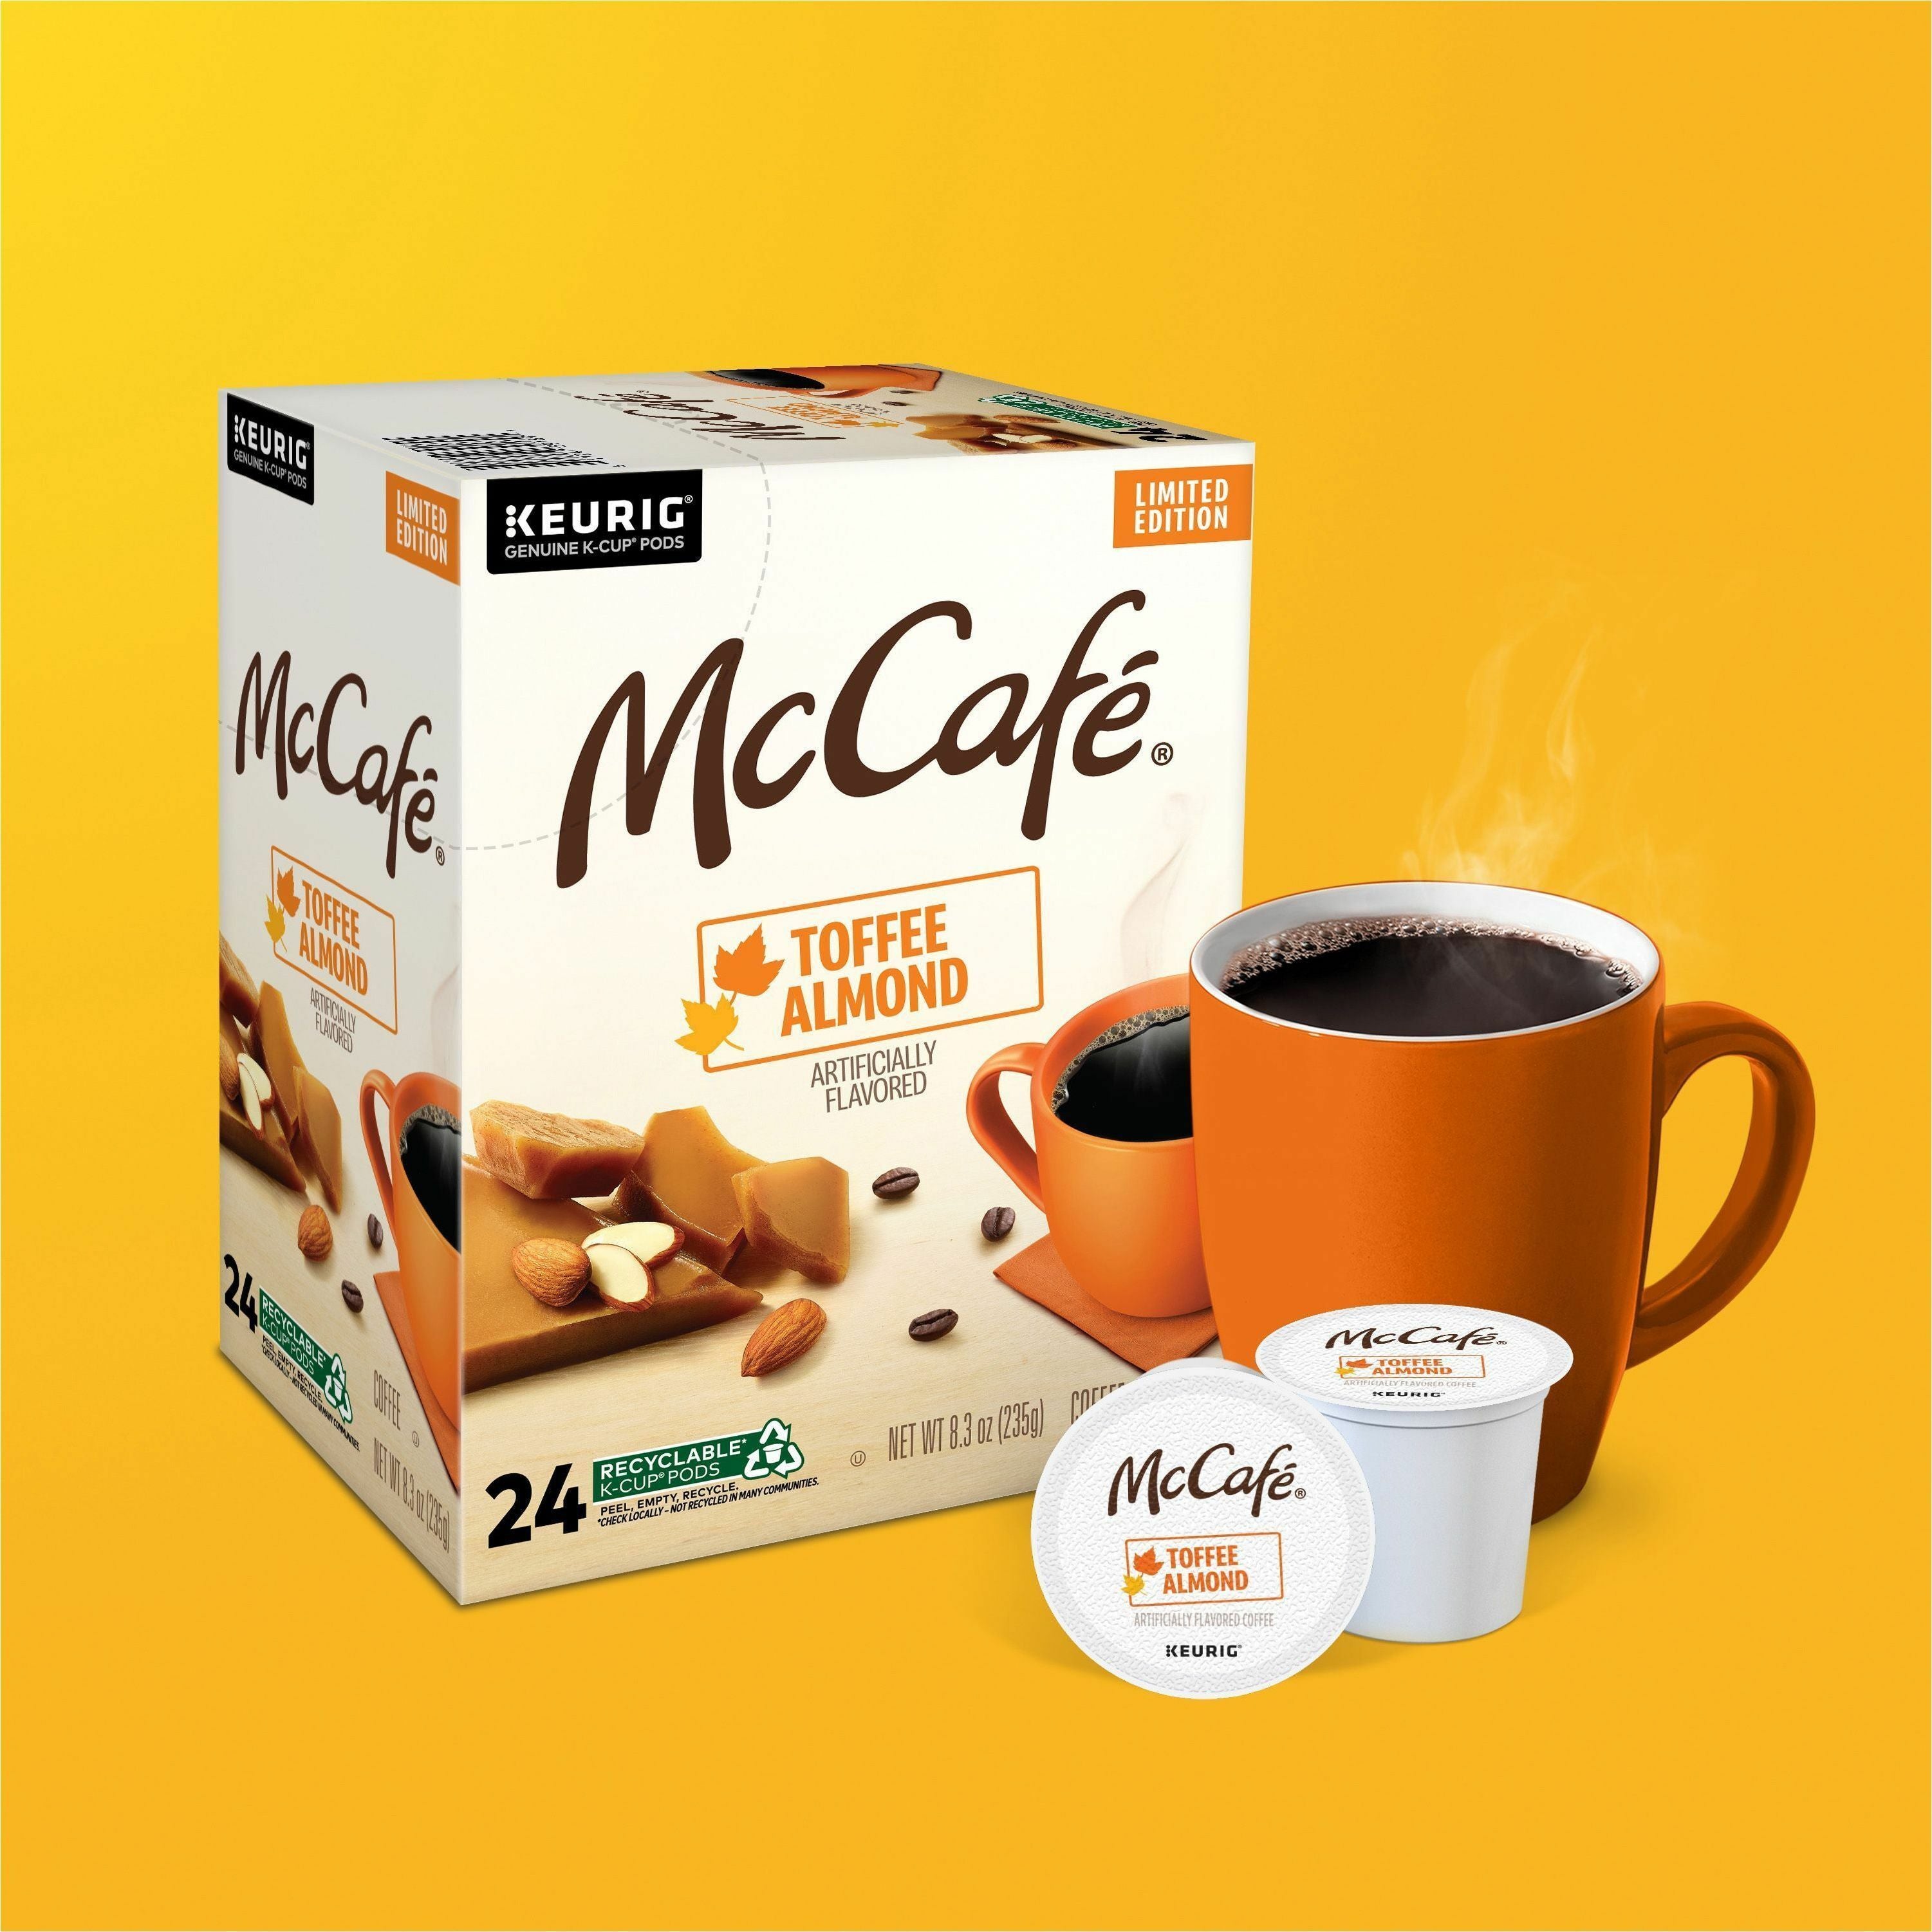 mccafe-k-cup-toffee-almond-coffee-compatible-with-keurig-brewer-light-24-box_gmt9189 - 2